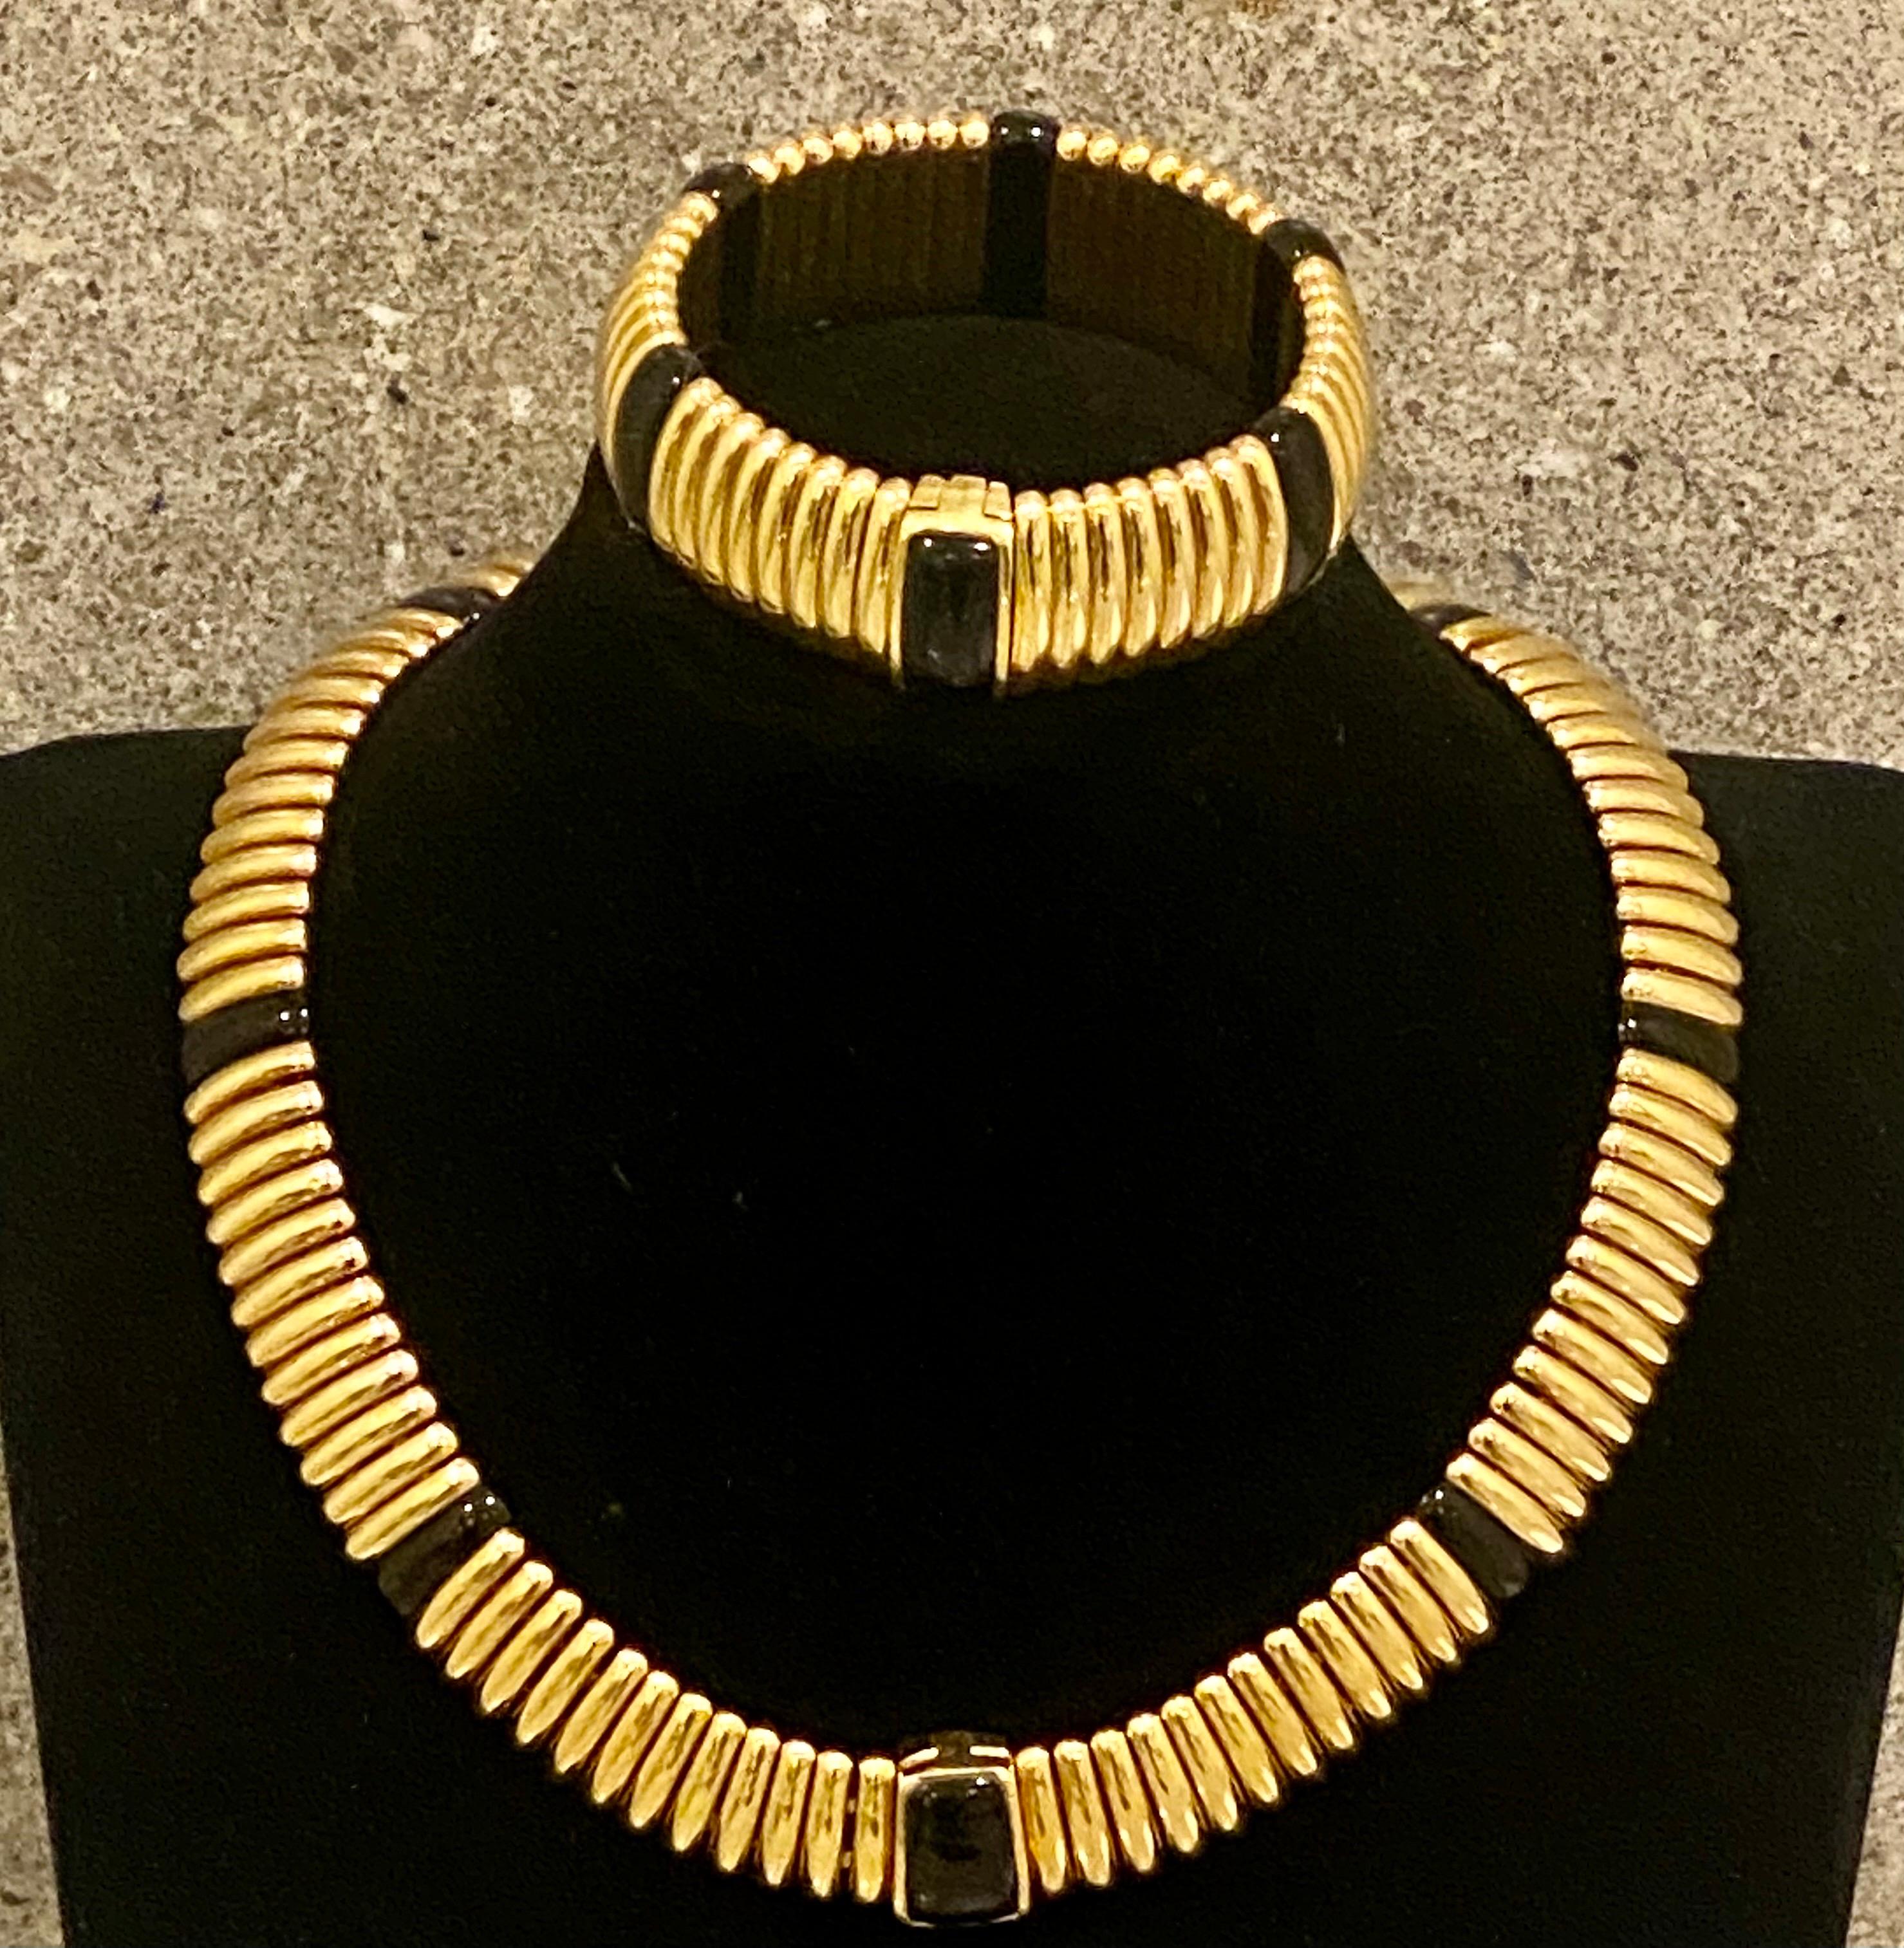 Kria Gioielli Italian 18K yellow gold and onyx Necklace and bracelet Suite showcasing a ribbed geometric design accented with onyx plaques with hidden clasps with a very secure closure. Signed 'Kria 750.
Measurements: The necklace measures 18 inches